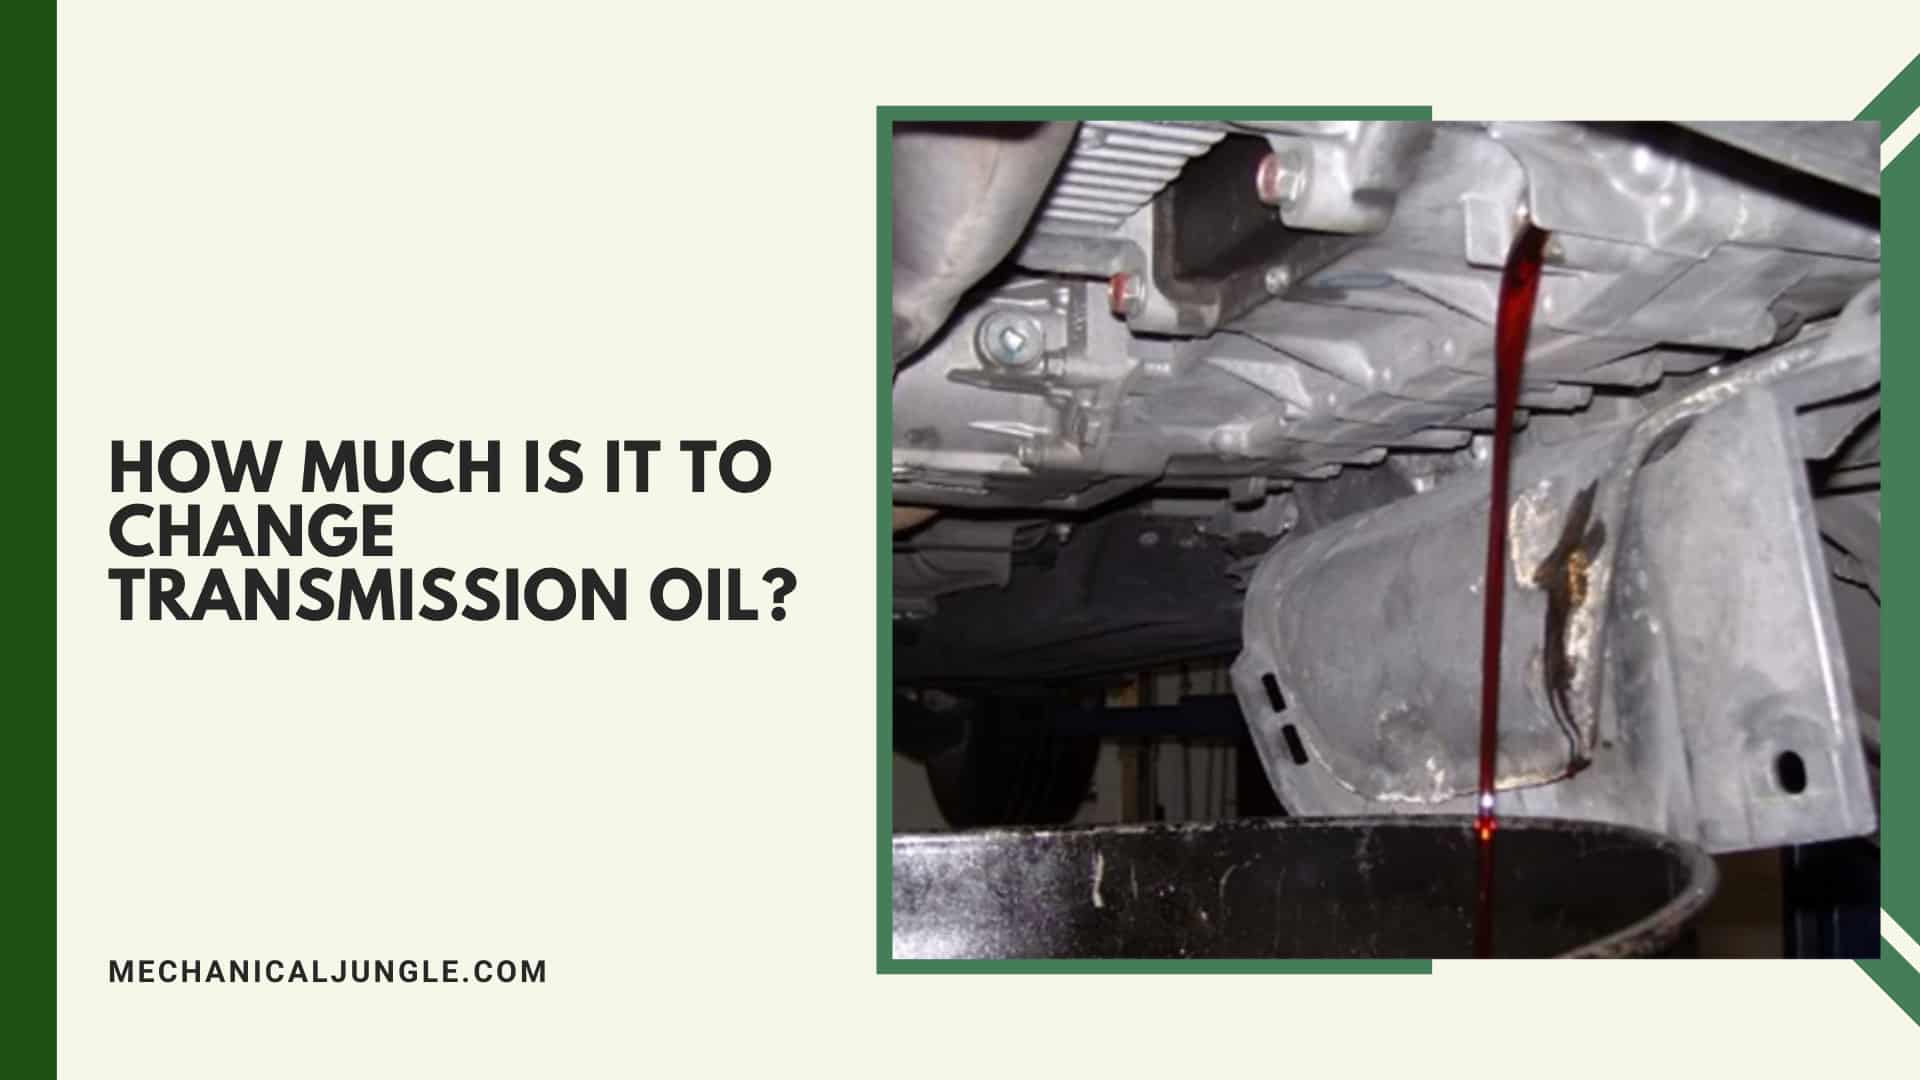 How Much Is It to Change Transmission Oil?